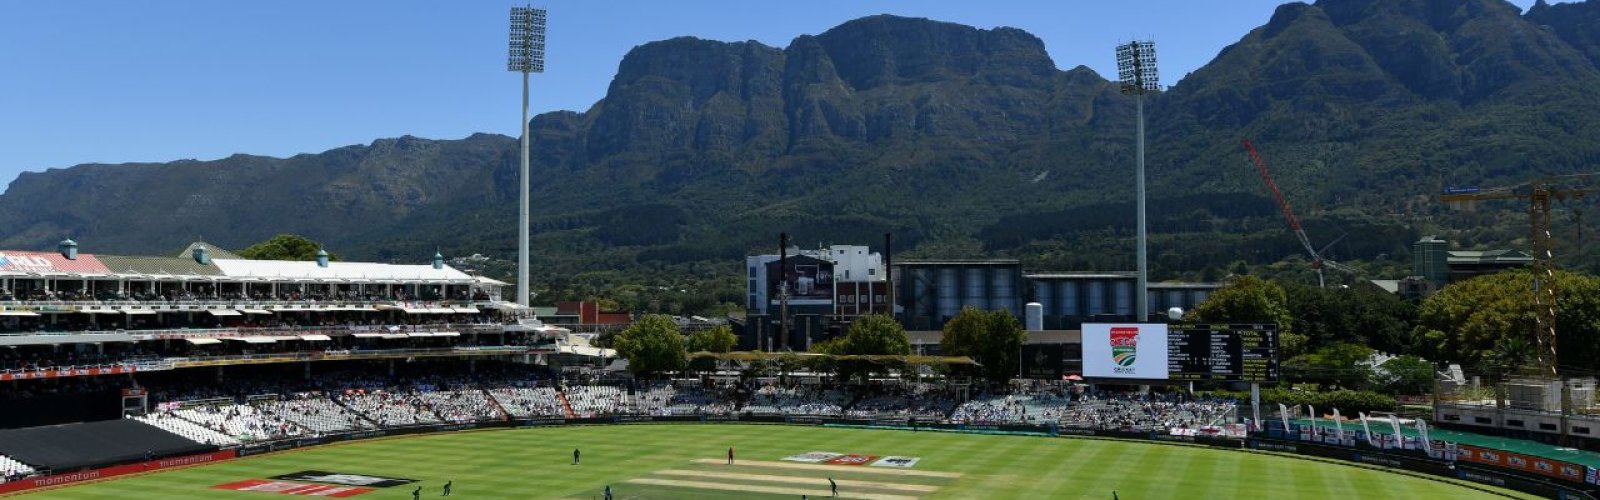 Newlands Cricket Ground in Cape Town, South African - Cricket ticket package